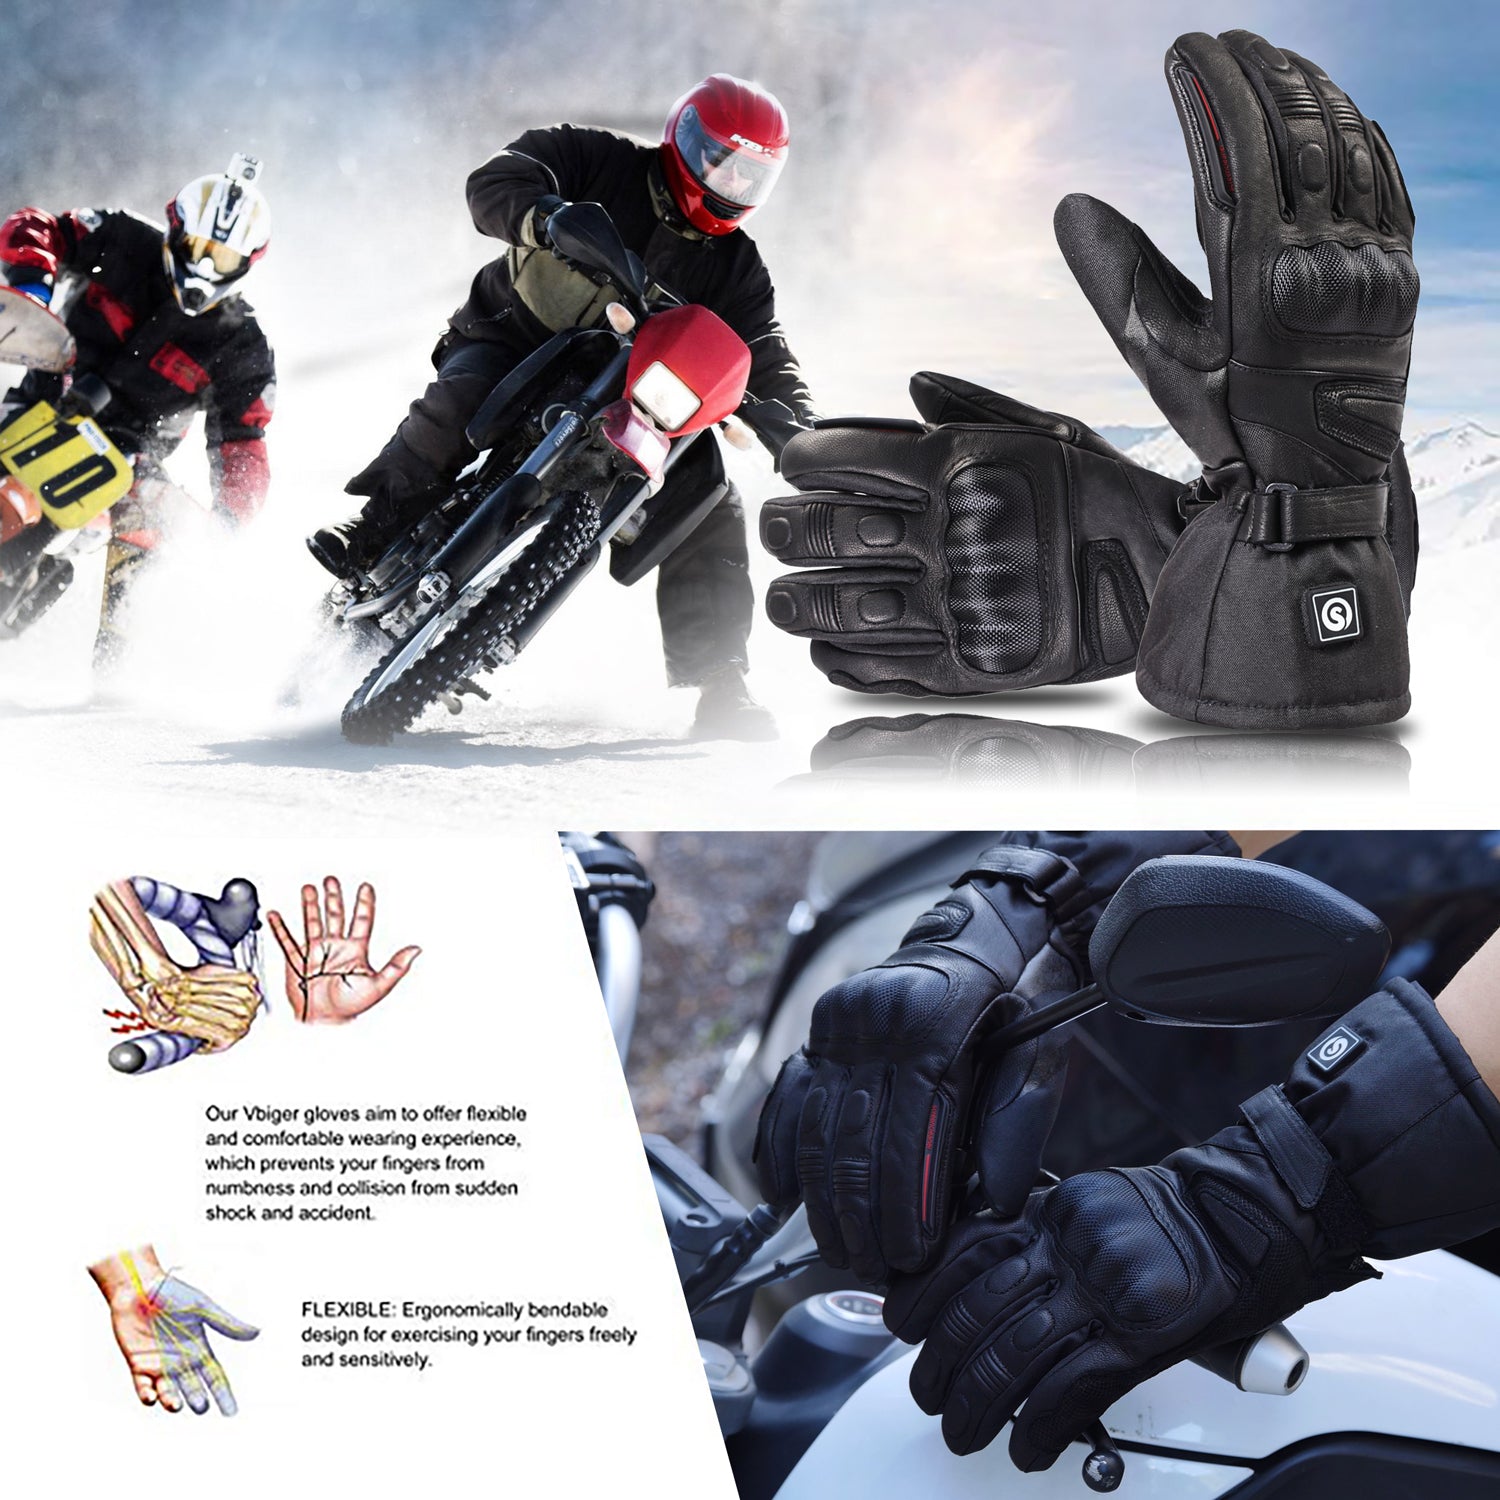 Day wolf Vanguard Heated Motorcycle Gloves with 12V Motorcycle Cable